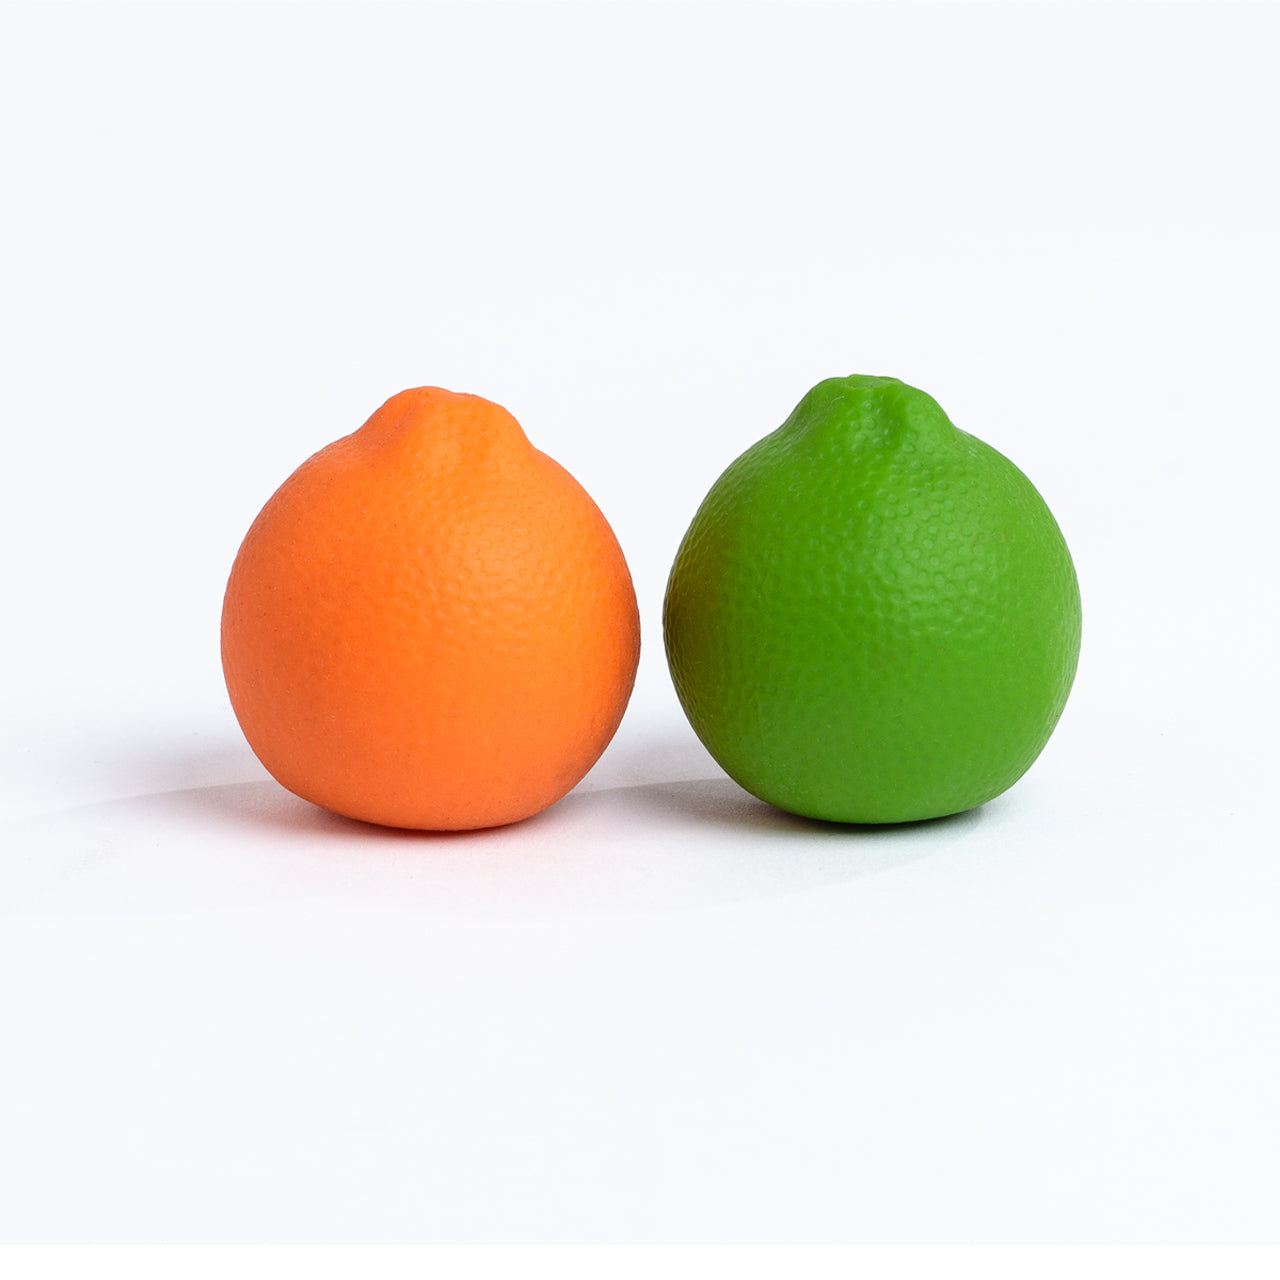 EcoWise Hand Therapy Fruit Squish Ball Pair